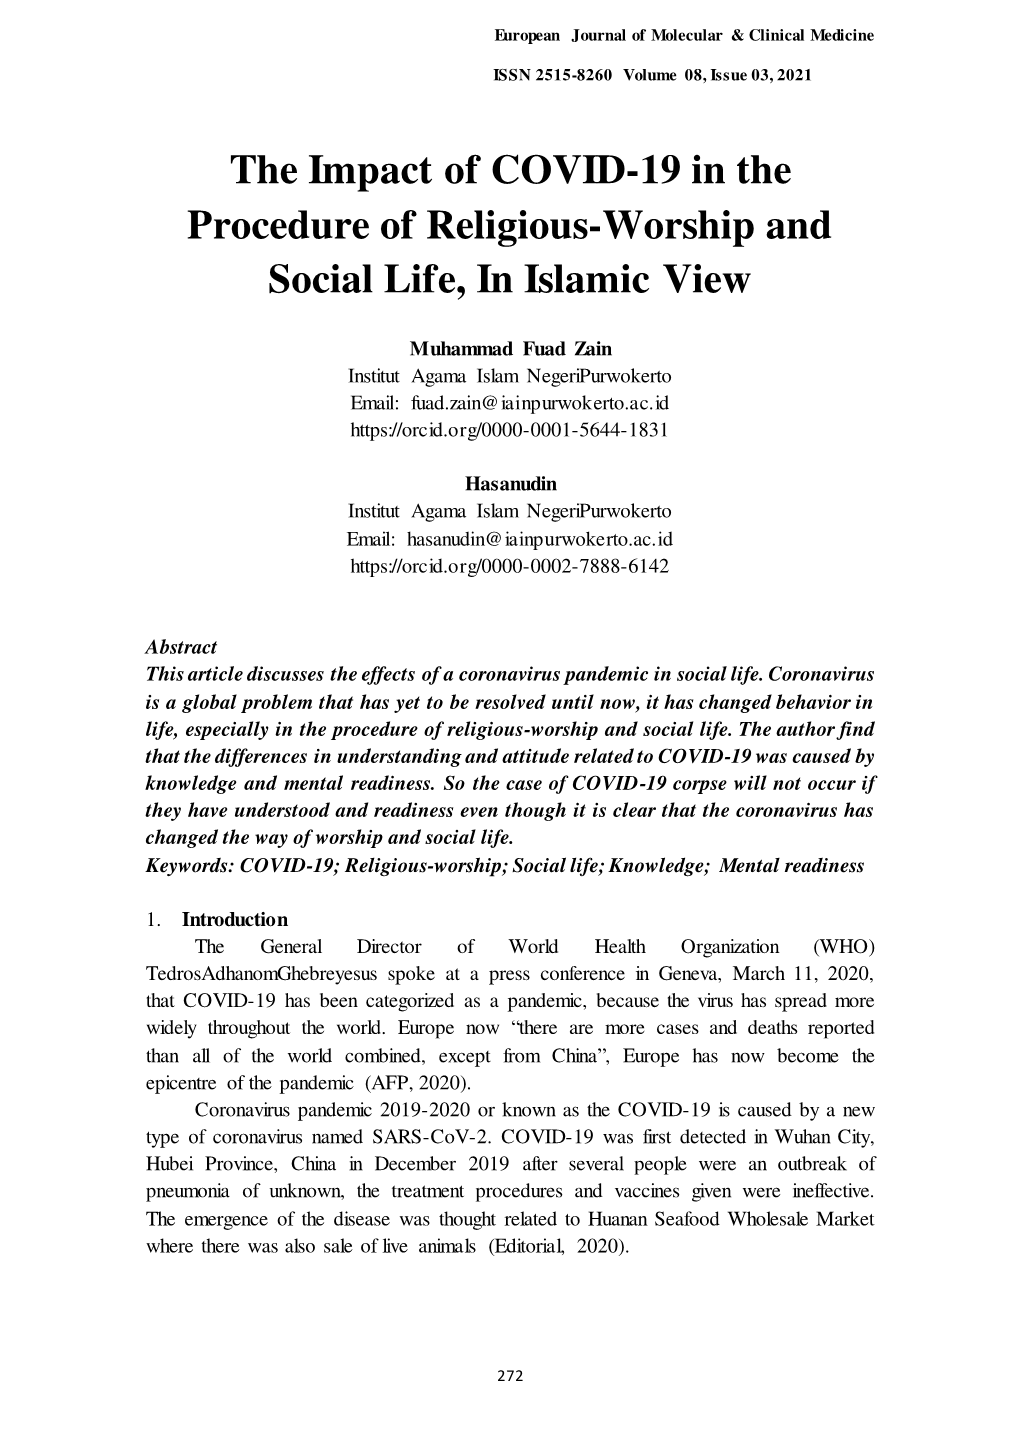 The Impact of COVID-19 in the Procedure of Religious-Worship and Social Life, in Islamic View